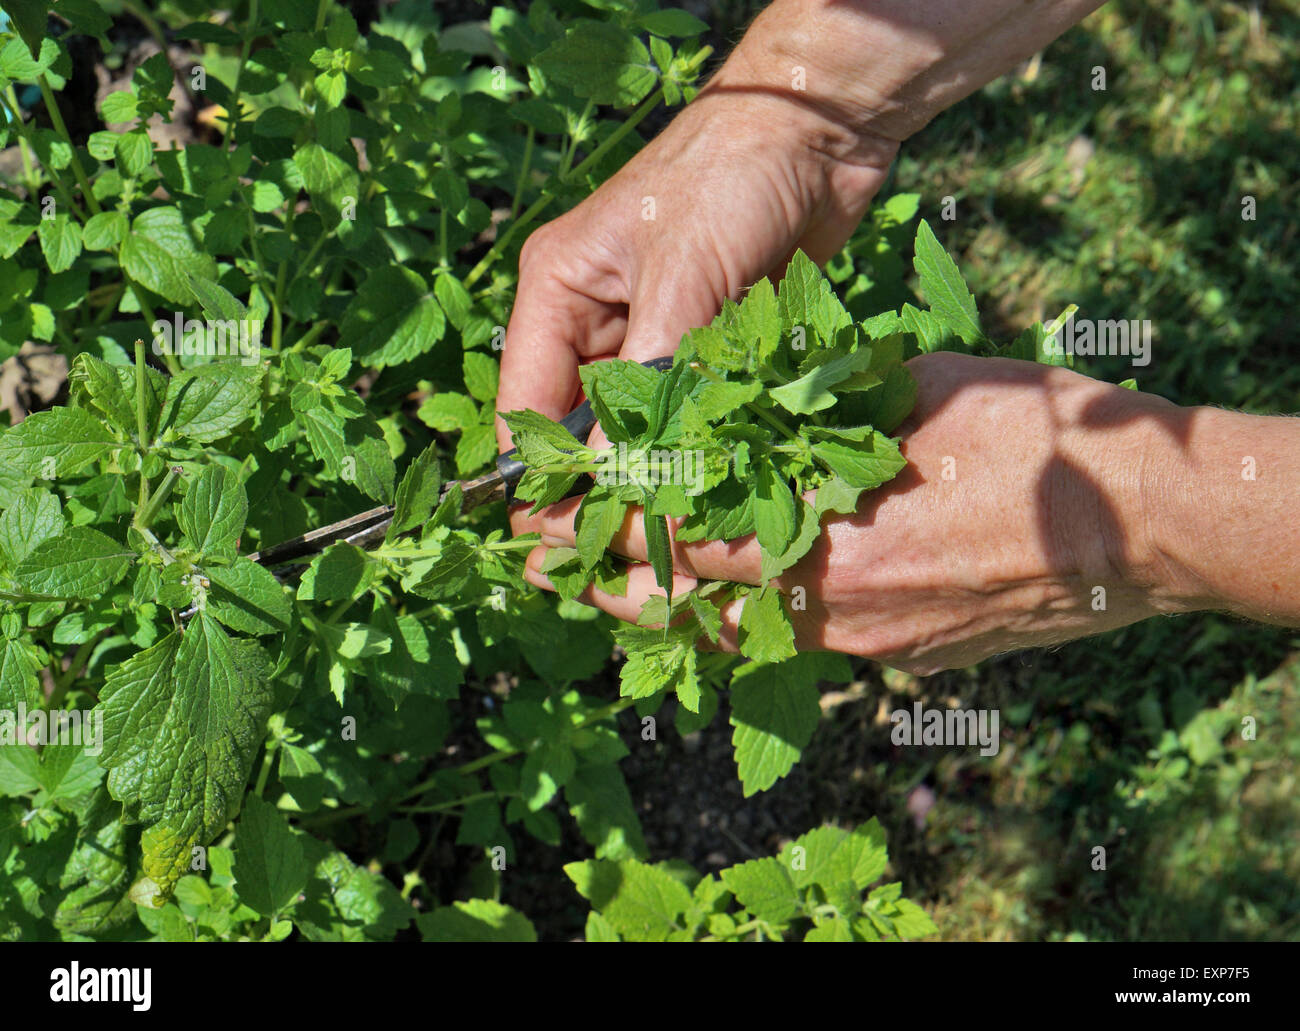 The rural worker cuts off scissors leaves of lemon mint for drying. Sunny summer garden day Stock Photo